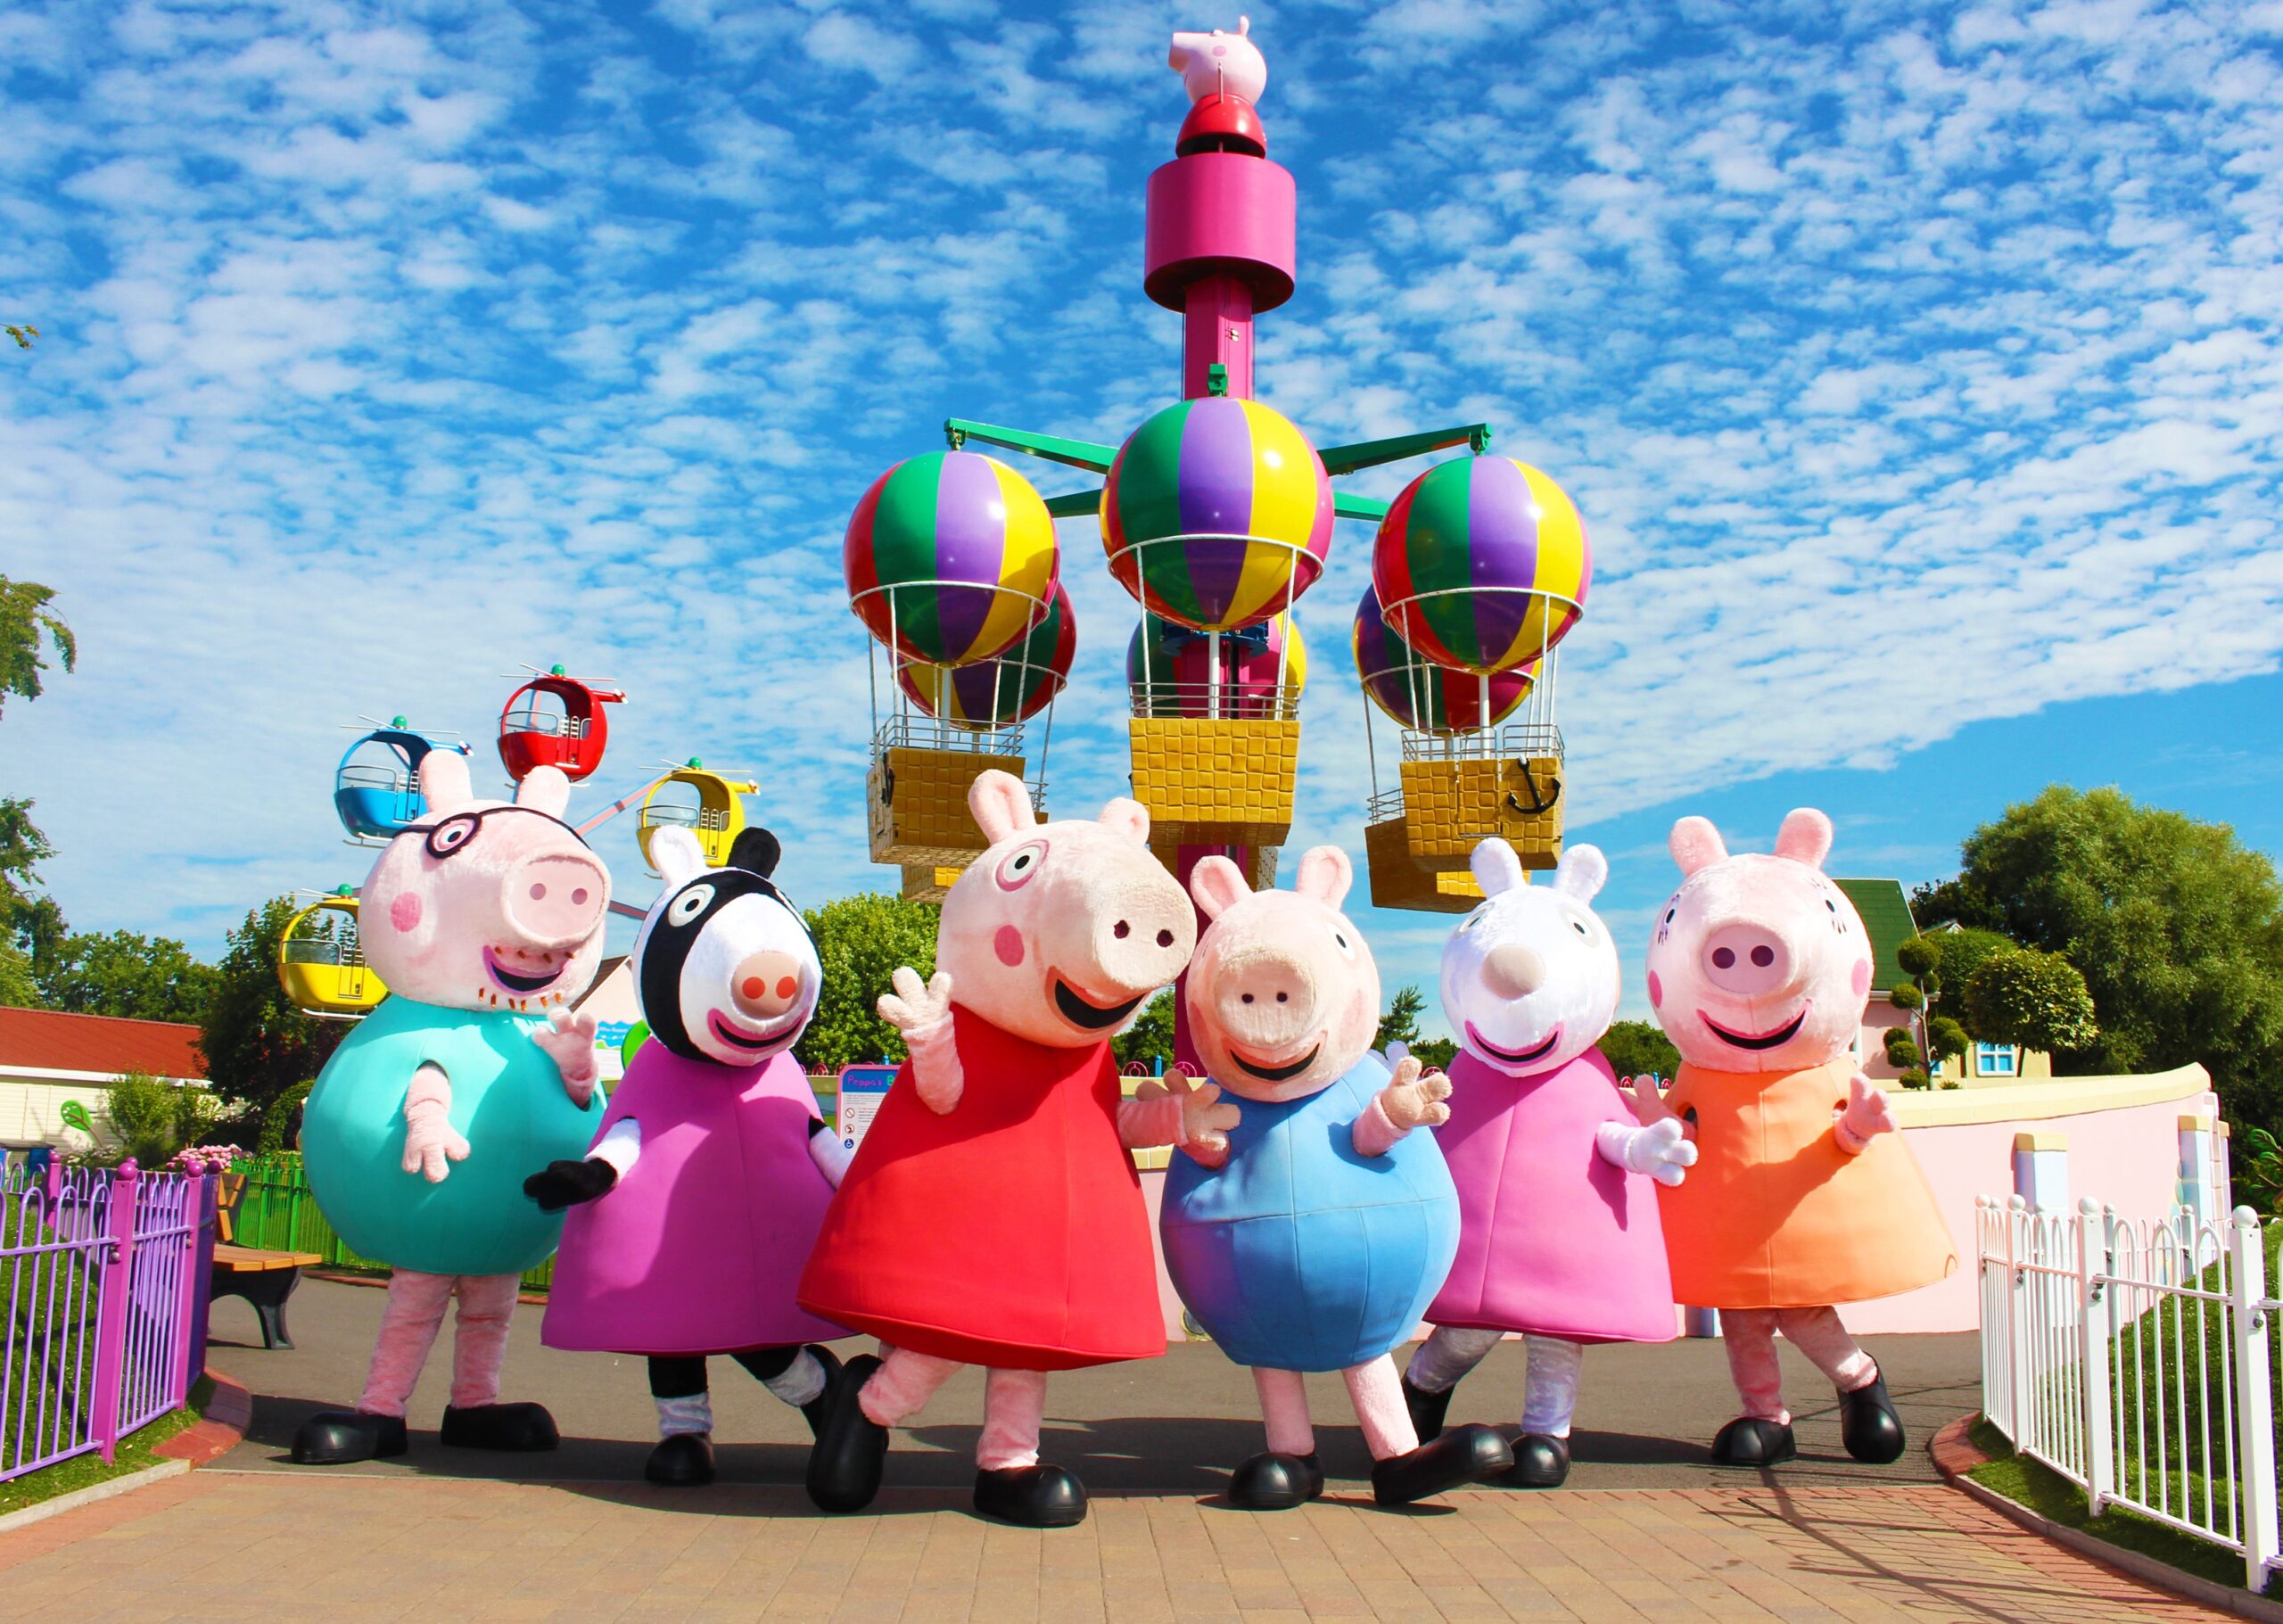 3 Useful Peppa Pig Theme Park Tips No One Gave You, But I Will